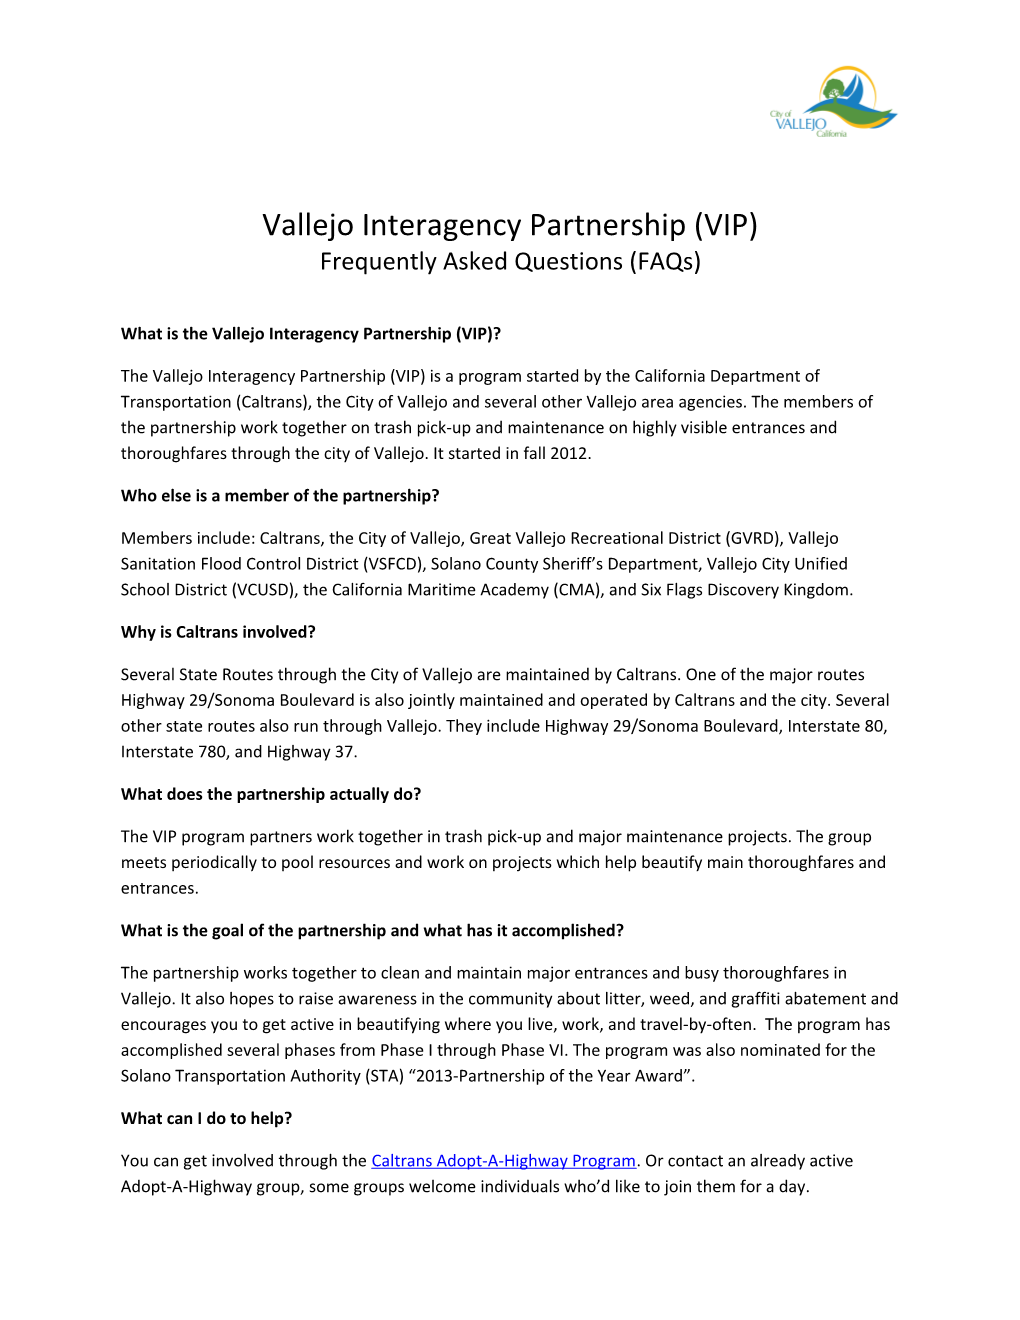 What Is the Vallejo Interagency Partnership (VIP)?